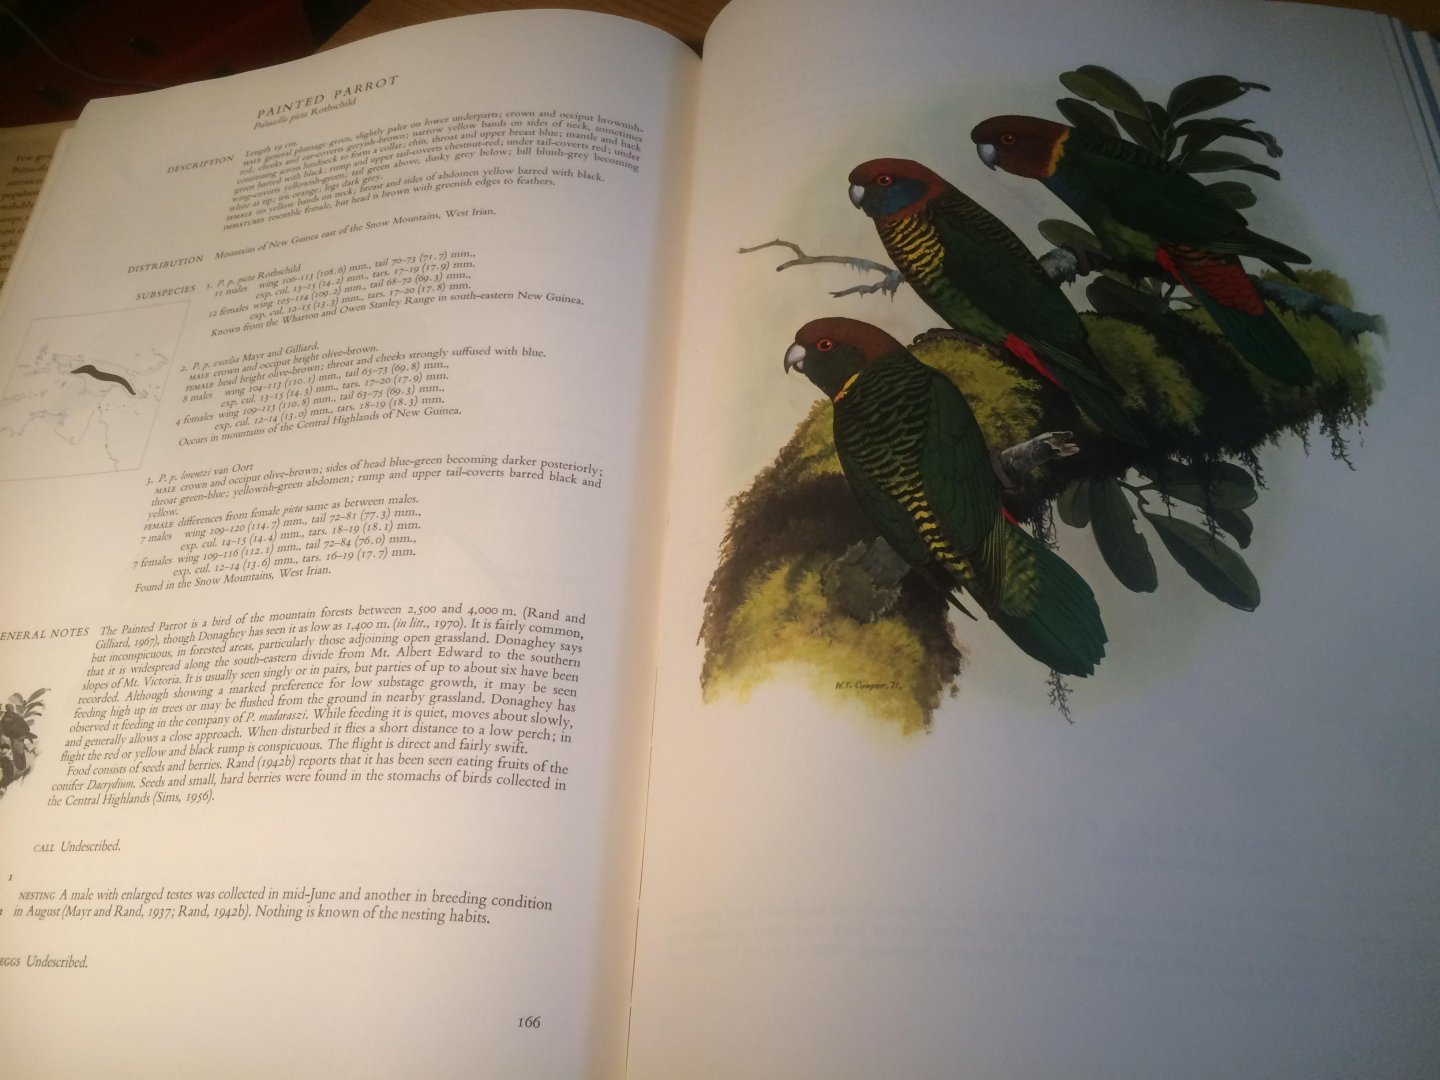 Forshaw, JM & WT Cooper - Parrots of the World - small folio ed